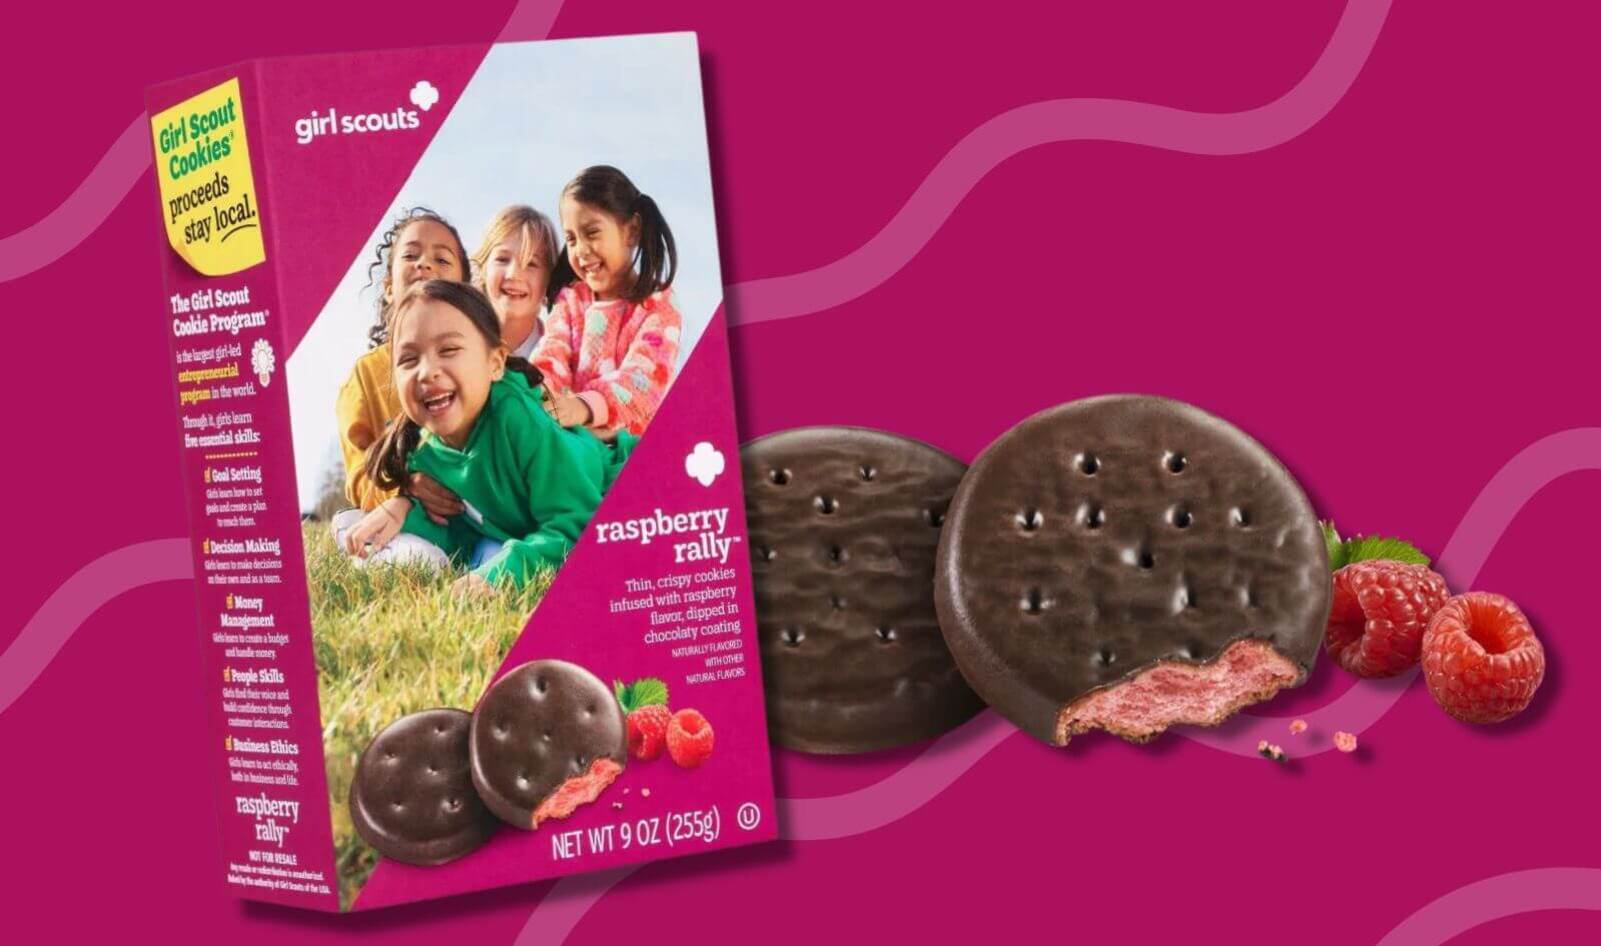 New Vegan Girl Scout Cookie Raspberry Rally Is Joining Thin Mints for the 2023 Season